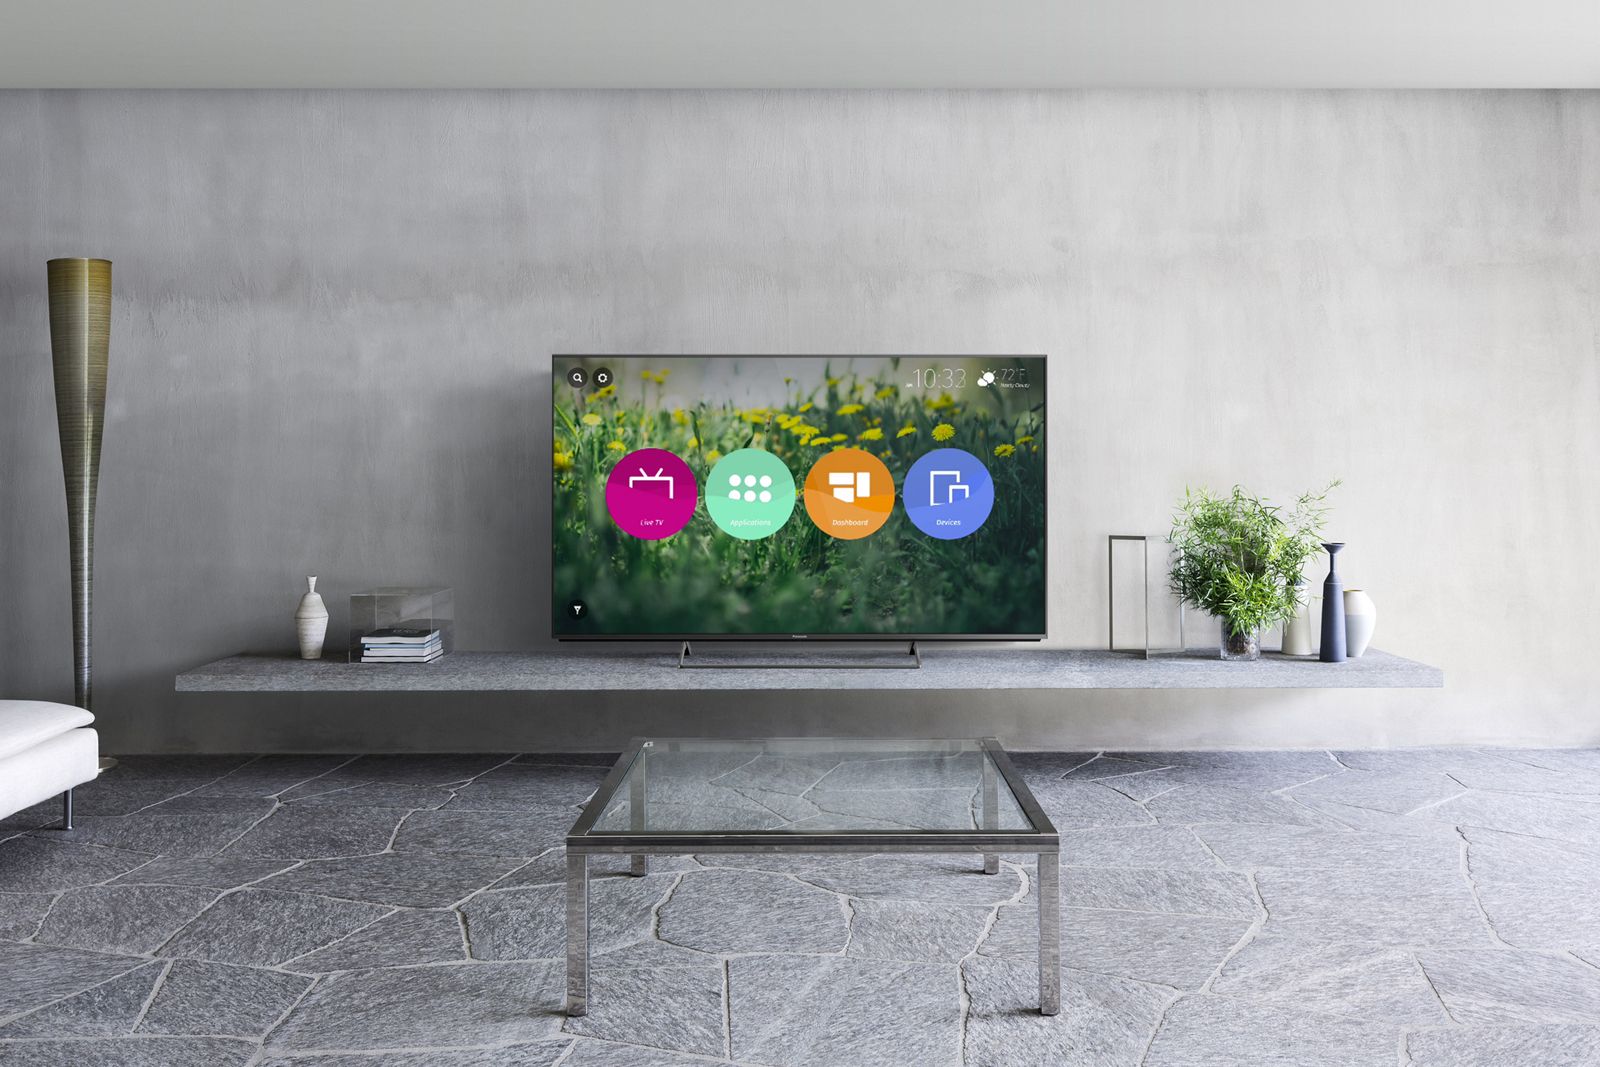 panasonic s 2015 4k tvs are firefox os powered cx850 is the new flagship image 1